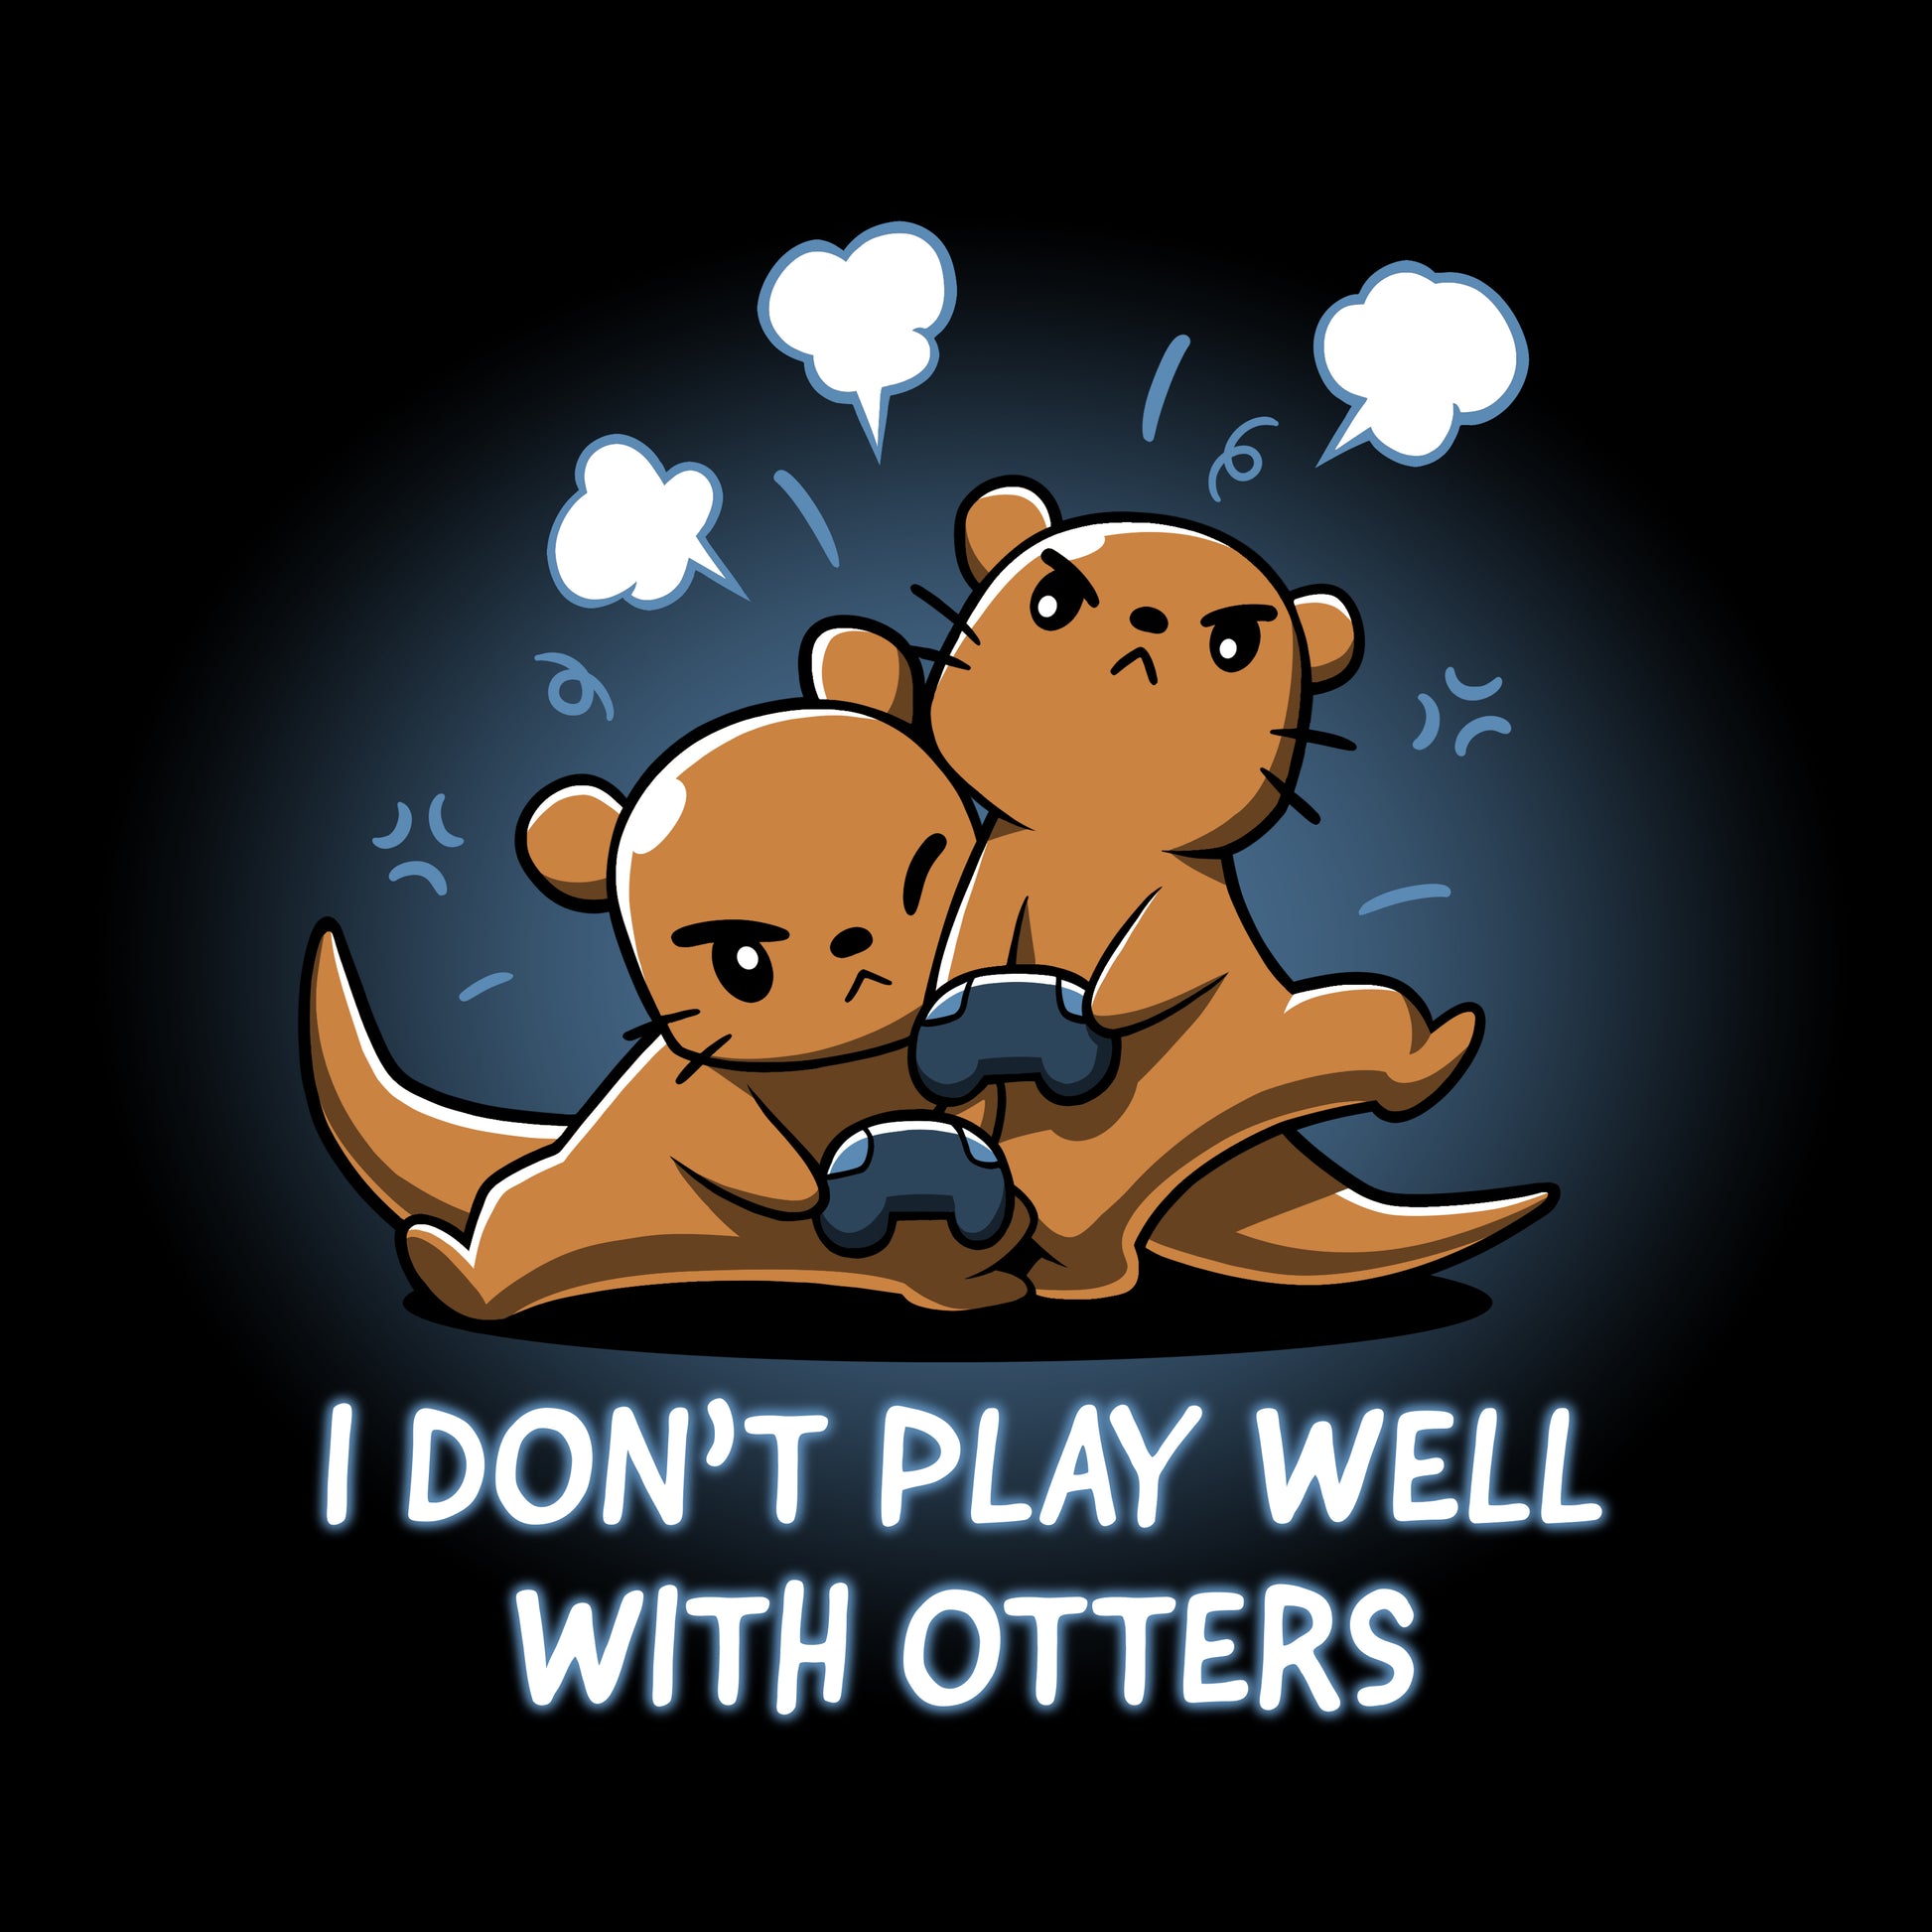 Two "I Don't Play Well with Otters" otters enjoying gaming together.